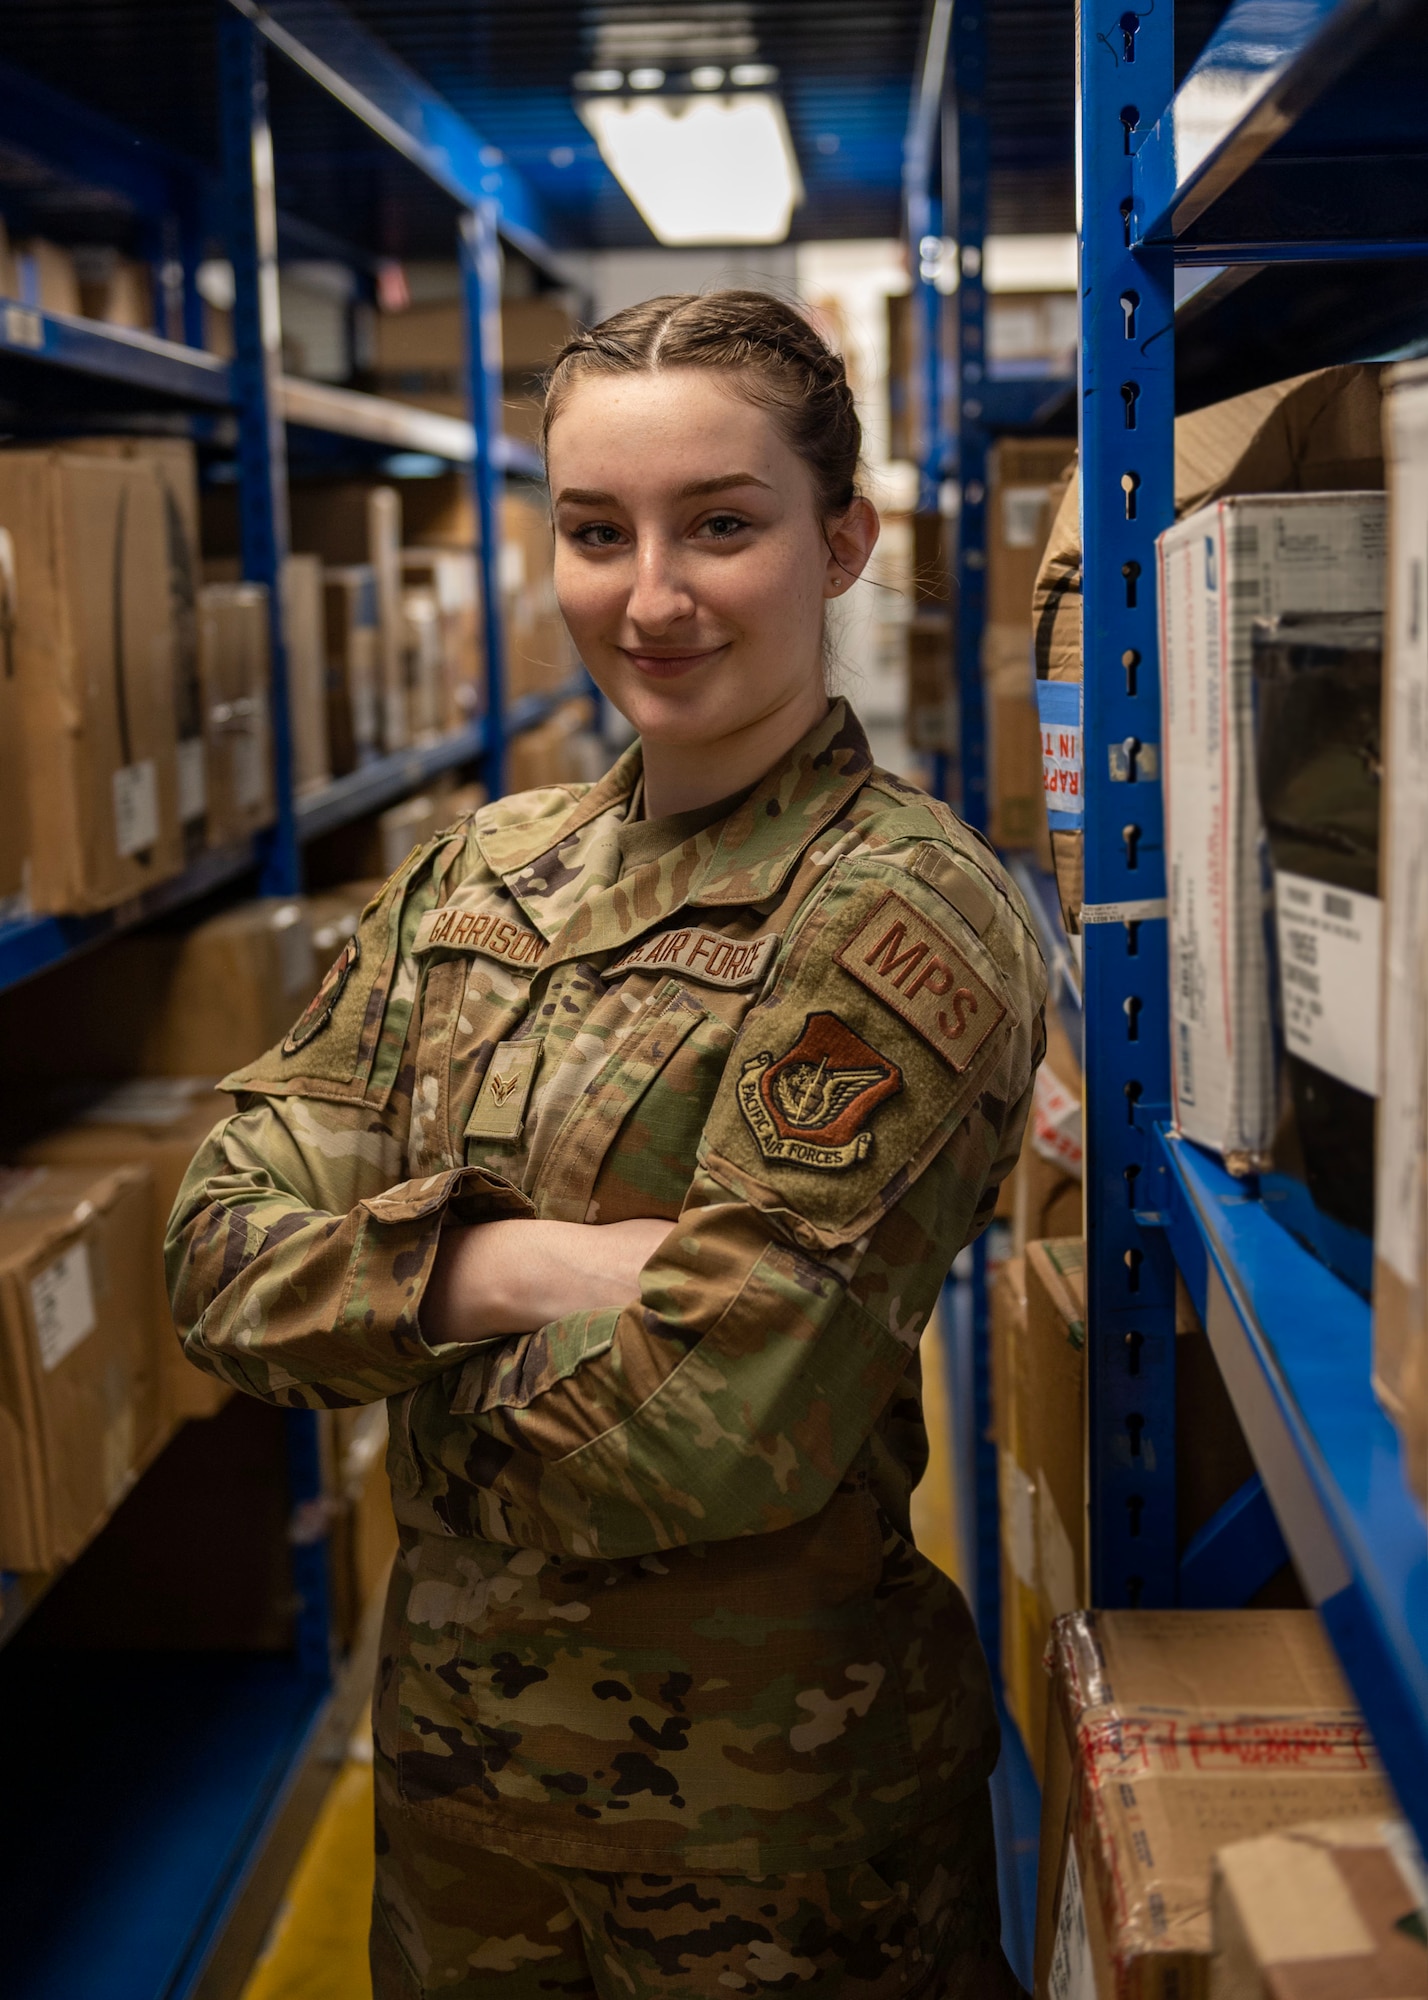 U.S. Air Force Airman 1st Class Brooke Garrison, 51st Force Support Squadron military postal clerk, poses for a portrait at Osan Air Base, Republic of Korea, April 19, 2024. Postal clerks handle all incoming and outgoing mail, which includes organizing letters, parcels and packages. Garrison earned Mustang of the Week, a title given to individuals who show exemplary effort, skill and knowledge within the 51st Fighter Wing. (U.S. Air Force photo by Staff Sgt. Aubree Owens)